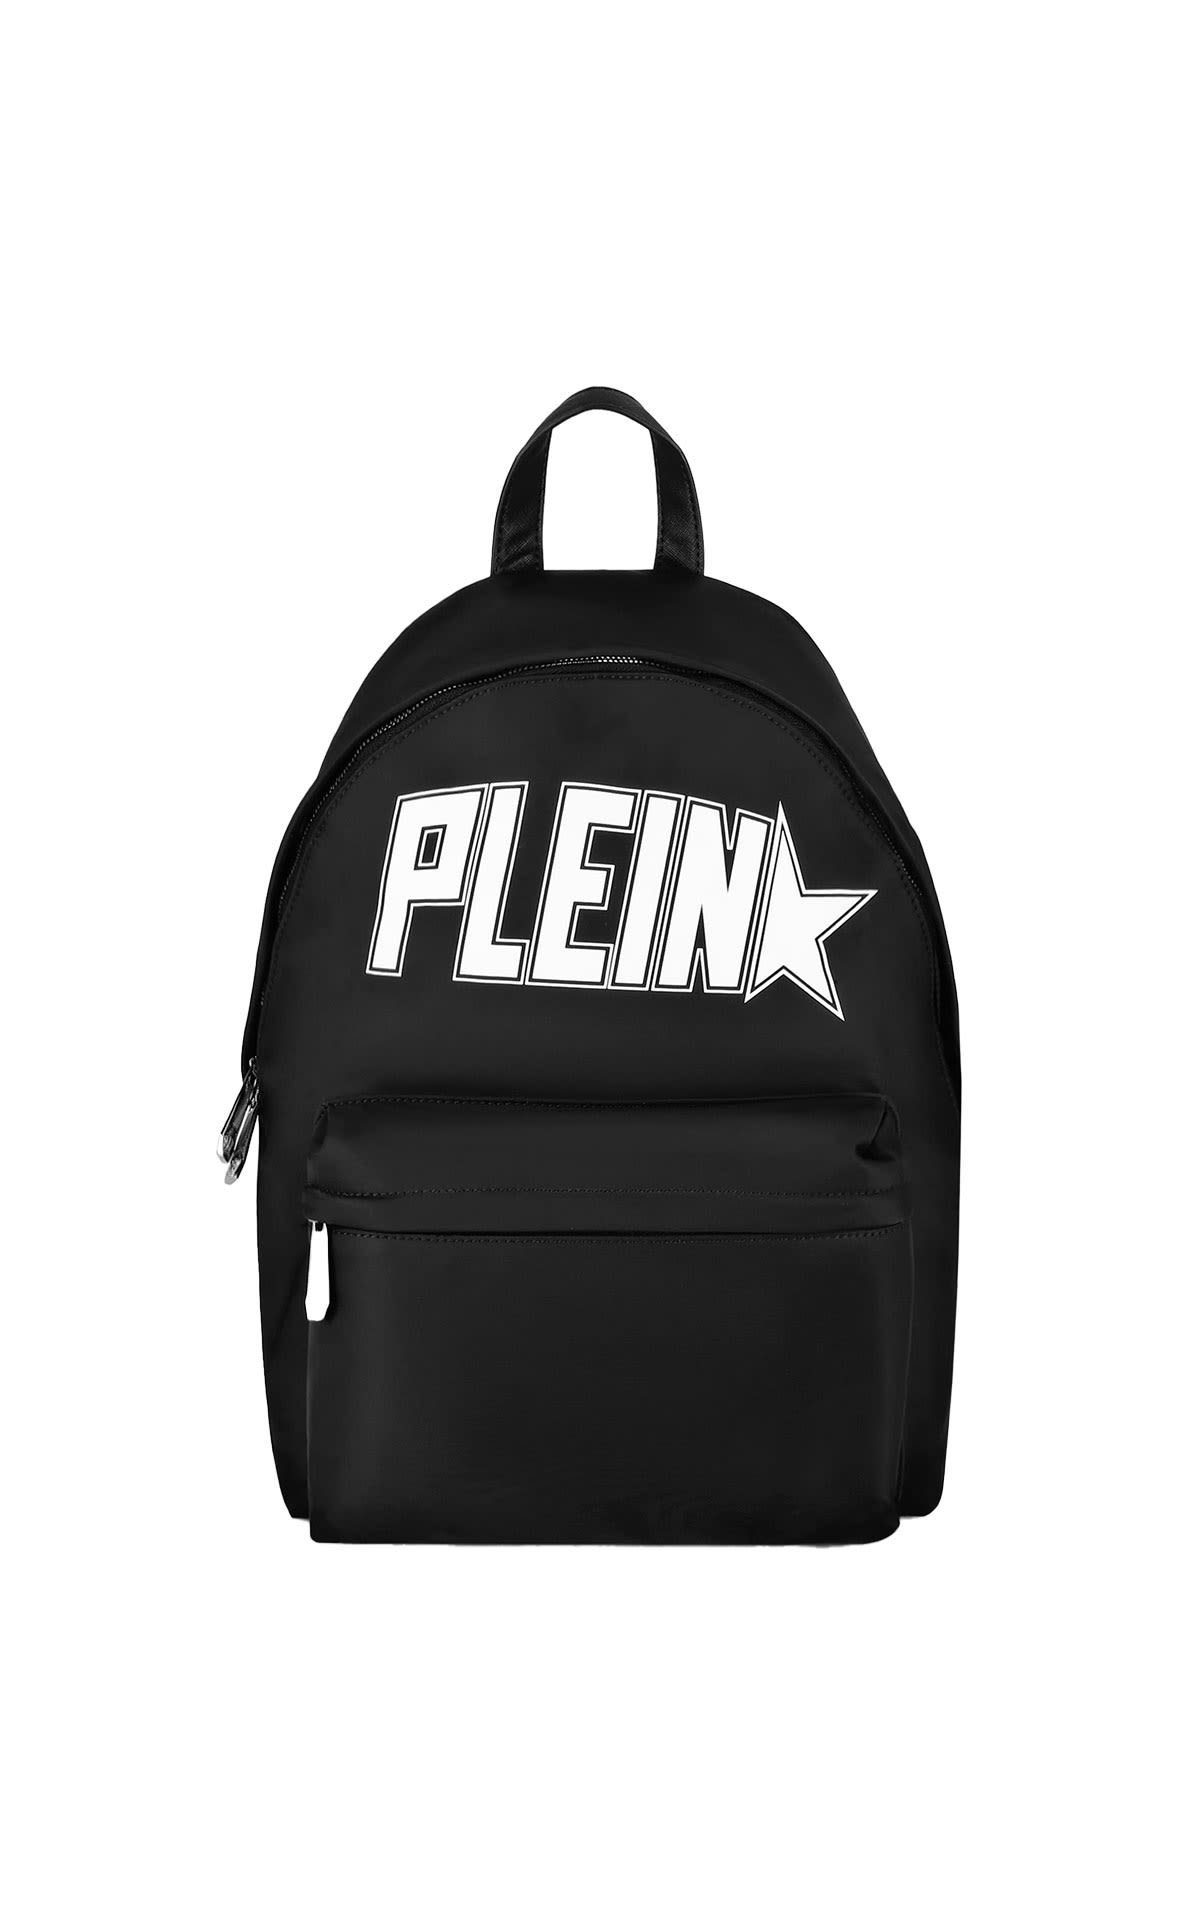 Nylon backpack with the brand printed on the front. philipp plein